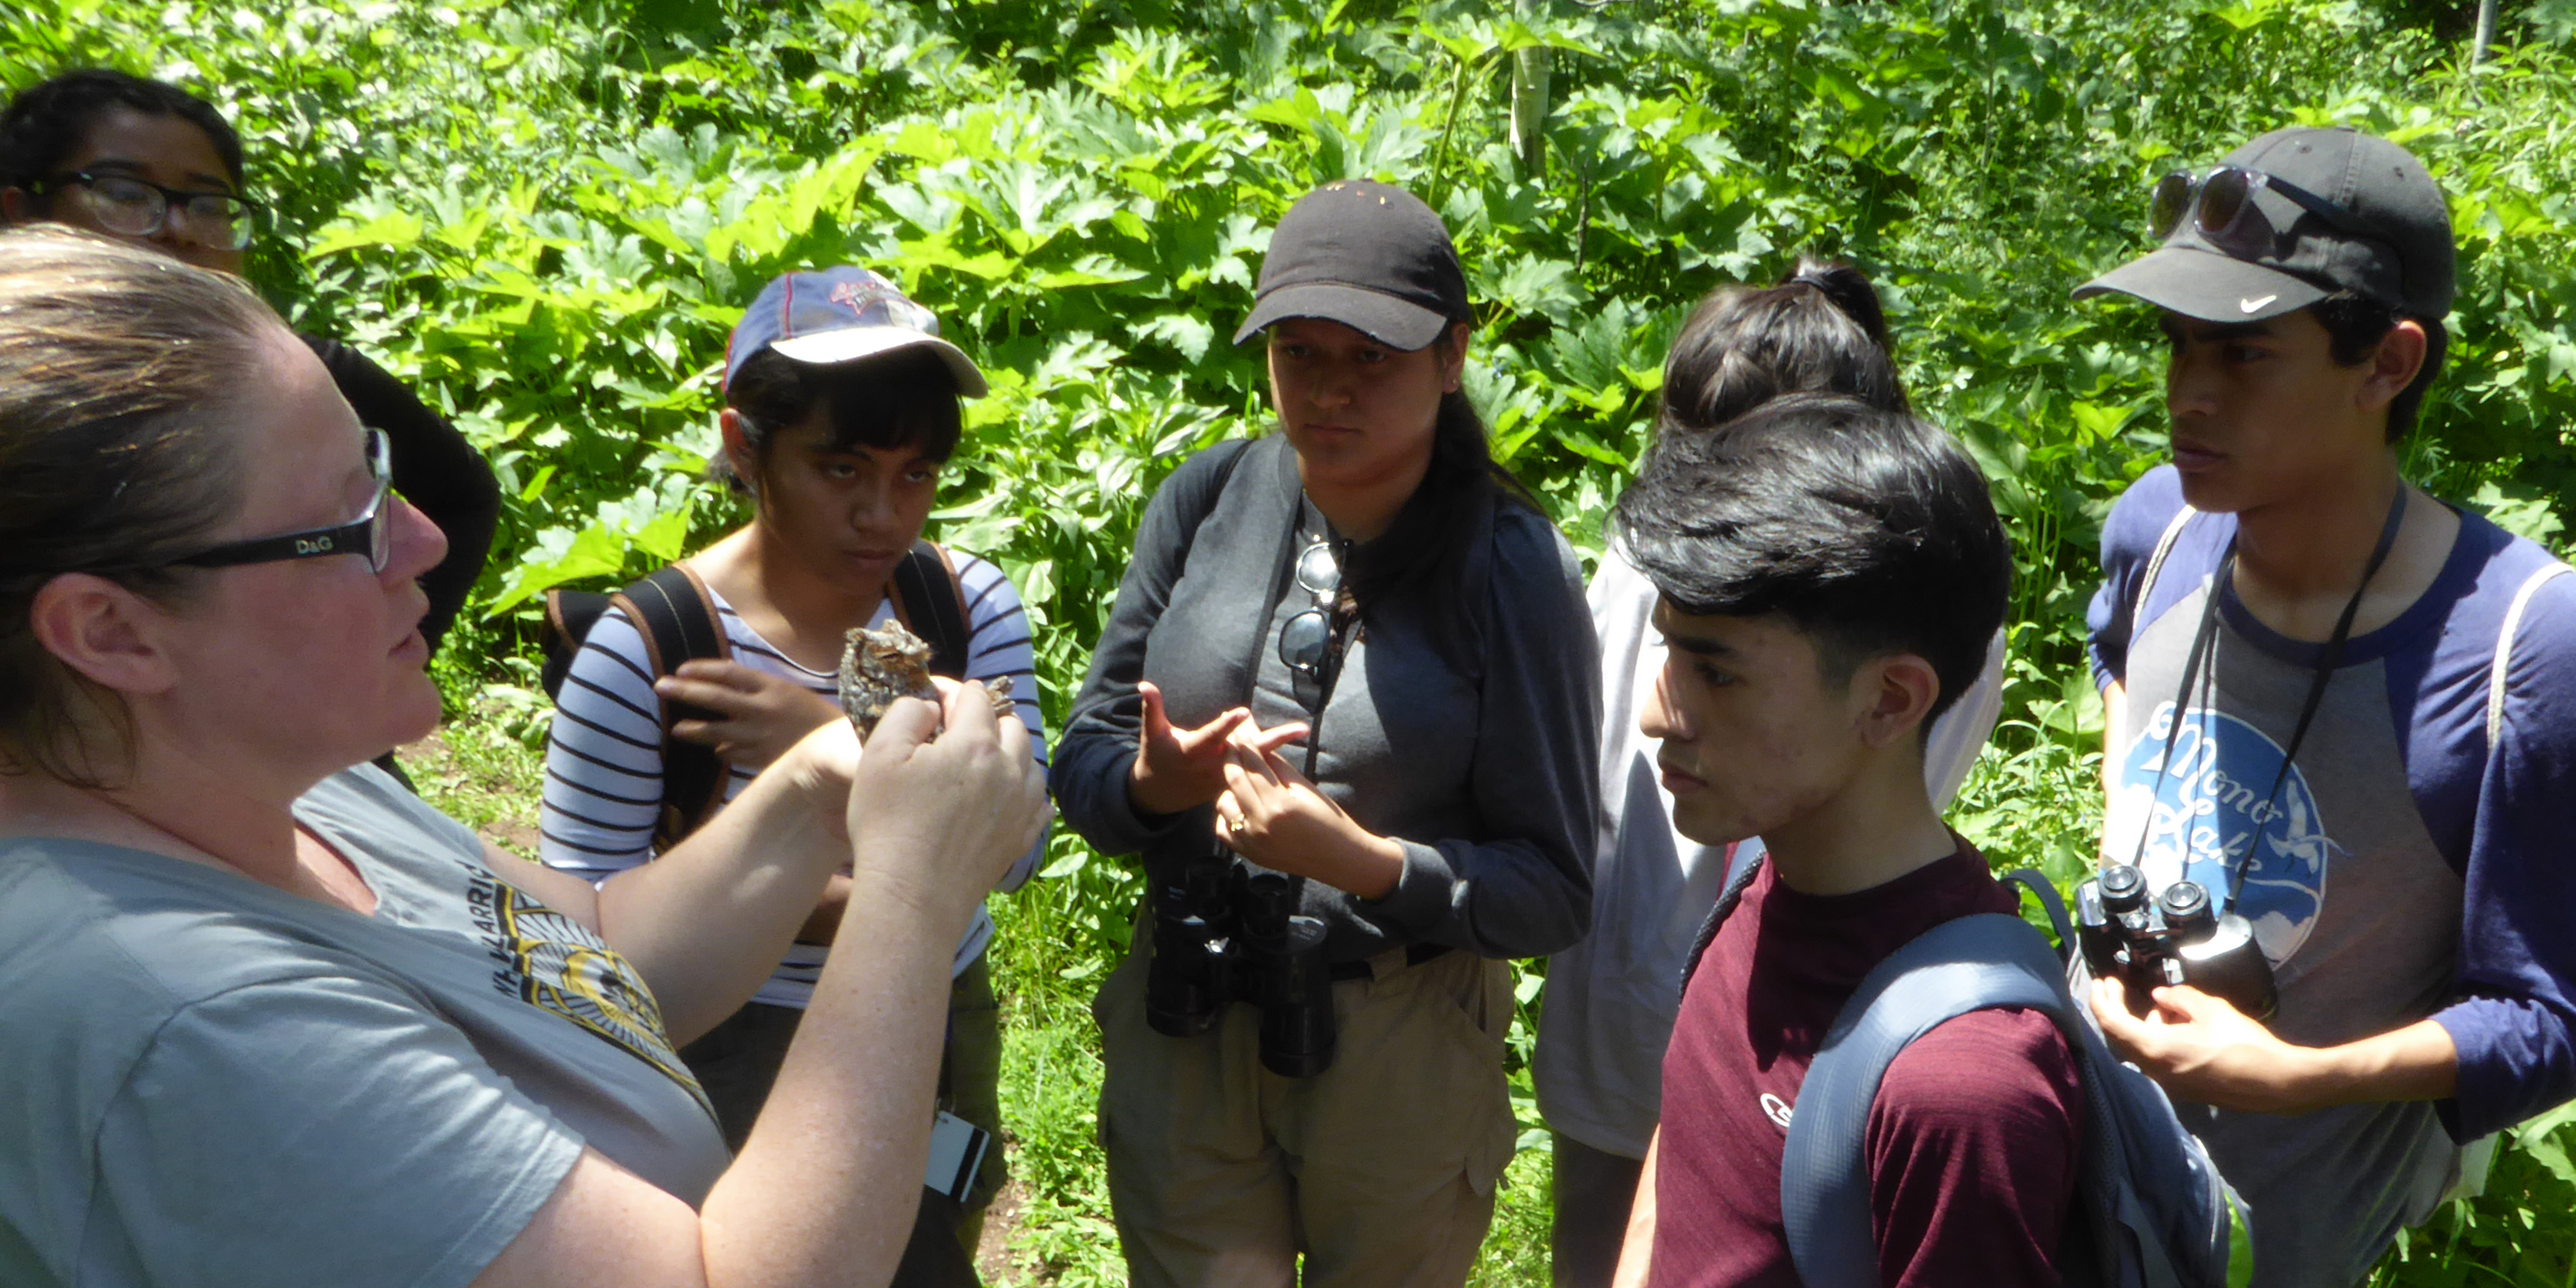 Earthwatch Student Group Expedition staff make safety and welfare a top priority, along with education and fieldwork.